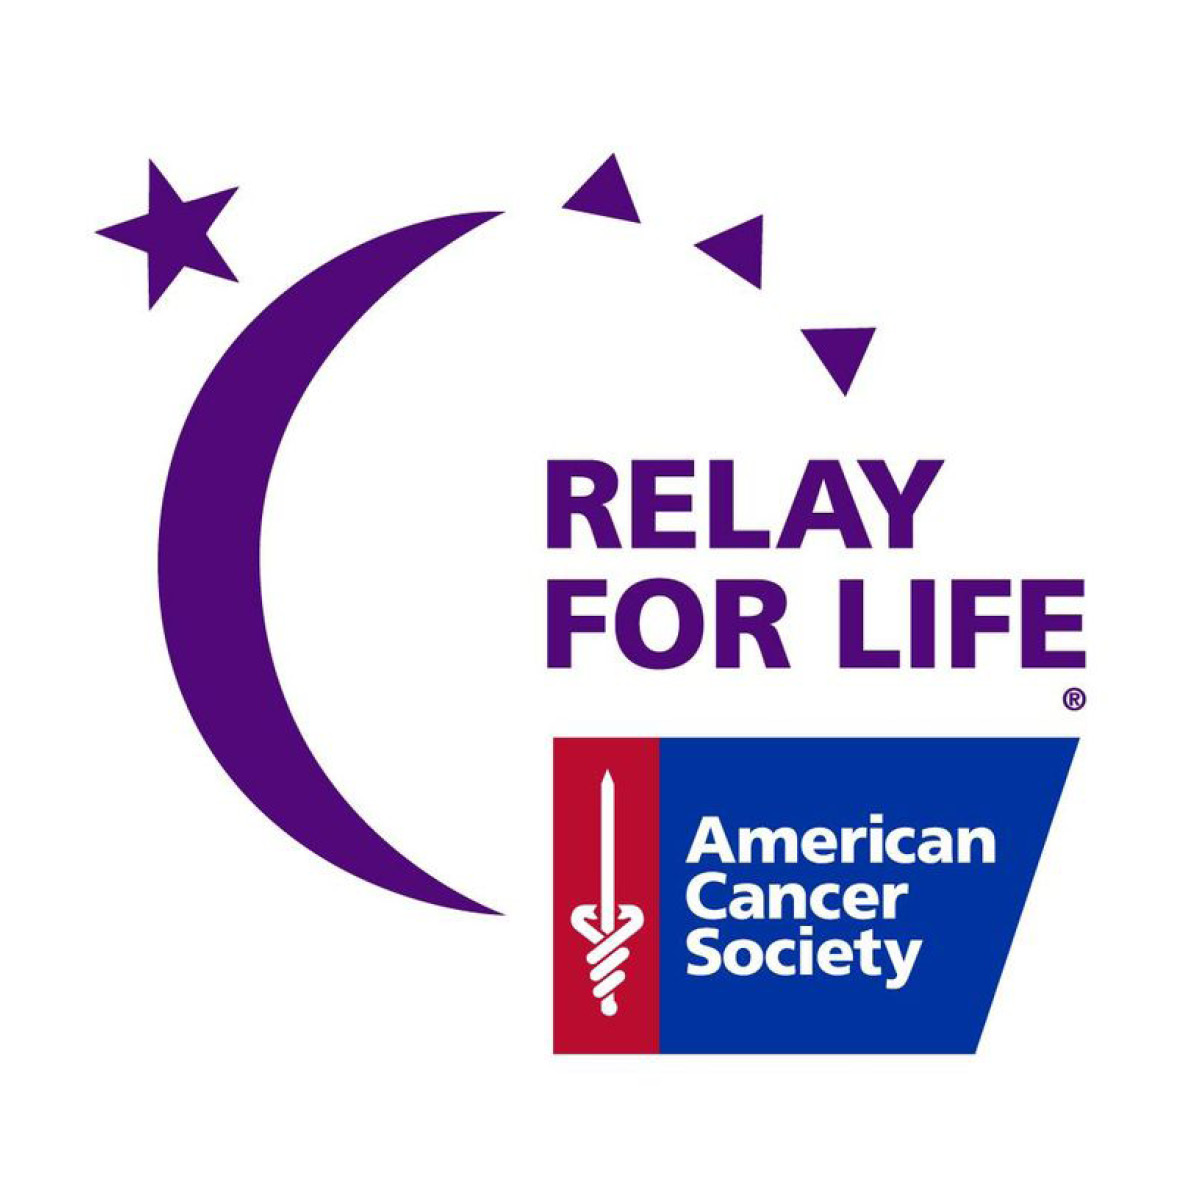 American Cancer Society Relay for Life logo